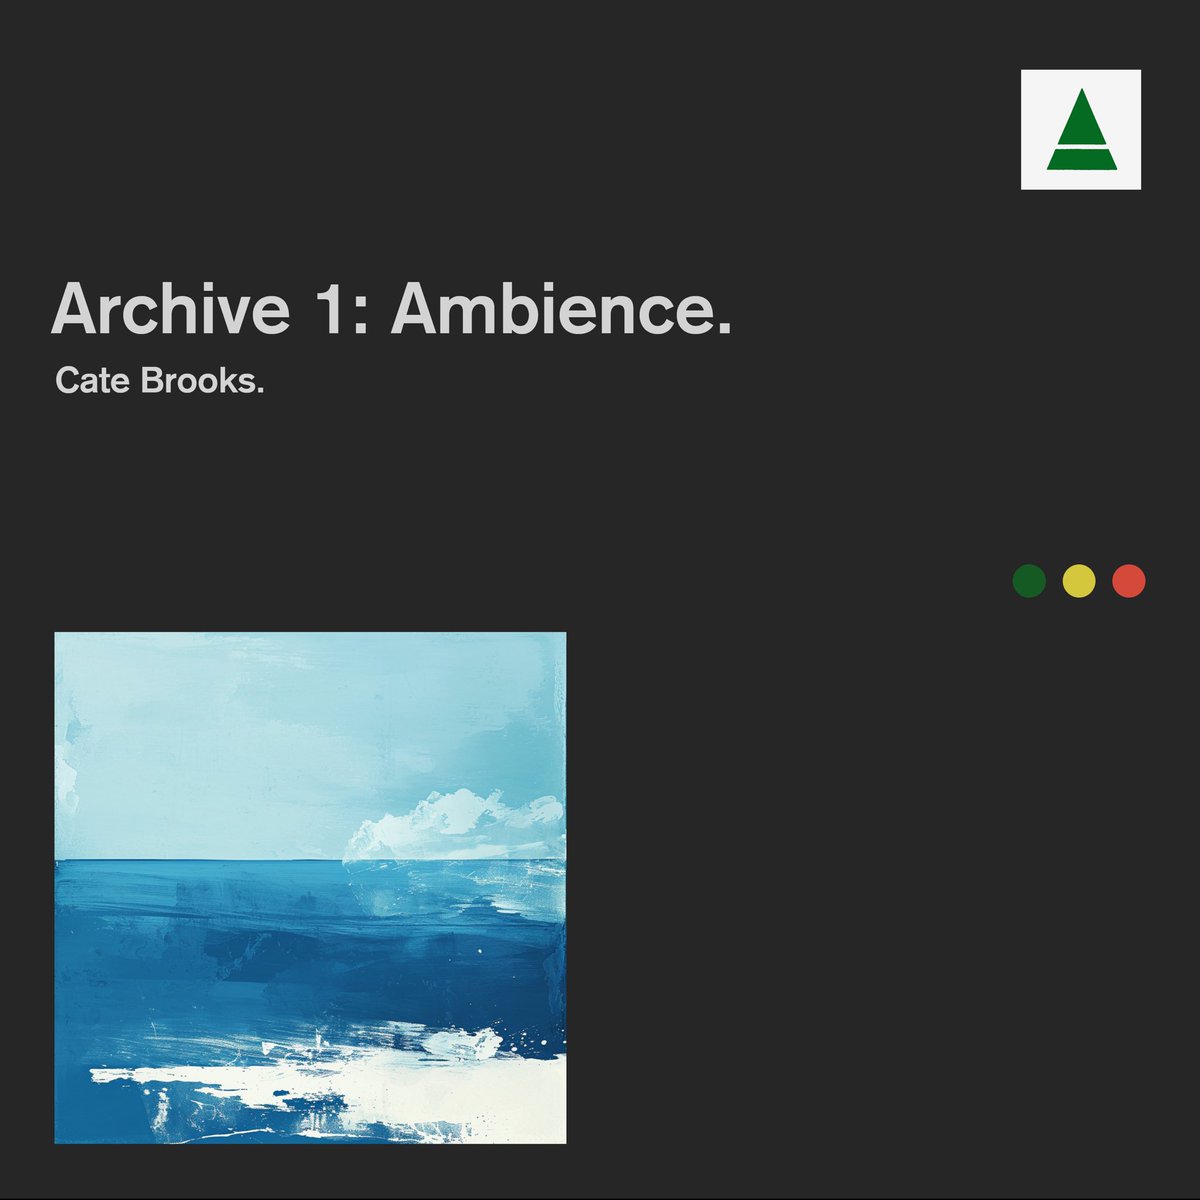 To everyone supporting me today on Bandcamp Friday, I really appreciate it, as it helps me to keep releasing music as an independent artist. Thank you 💕🌲 cafekaput.Bandcamp.com